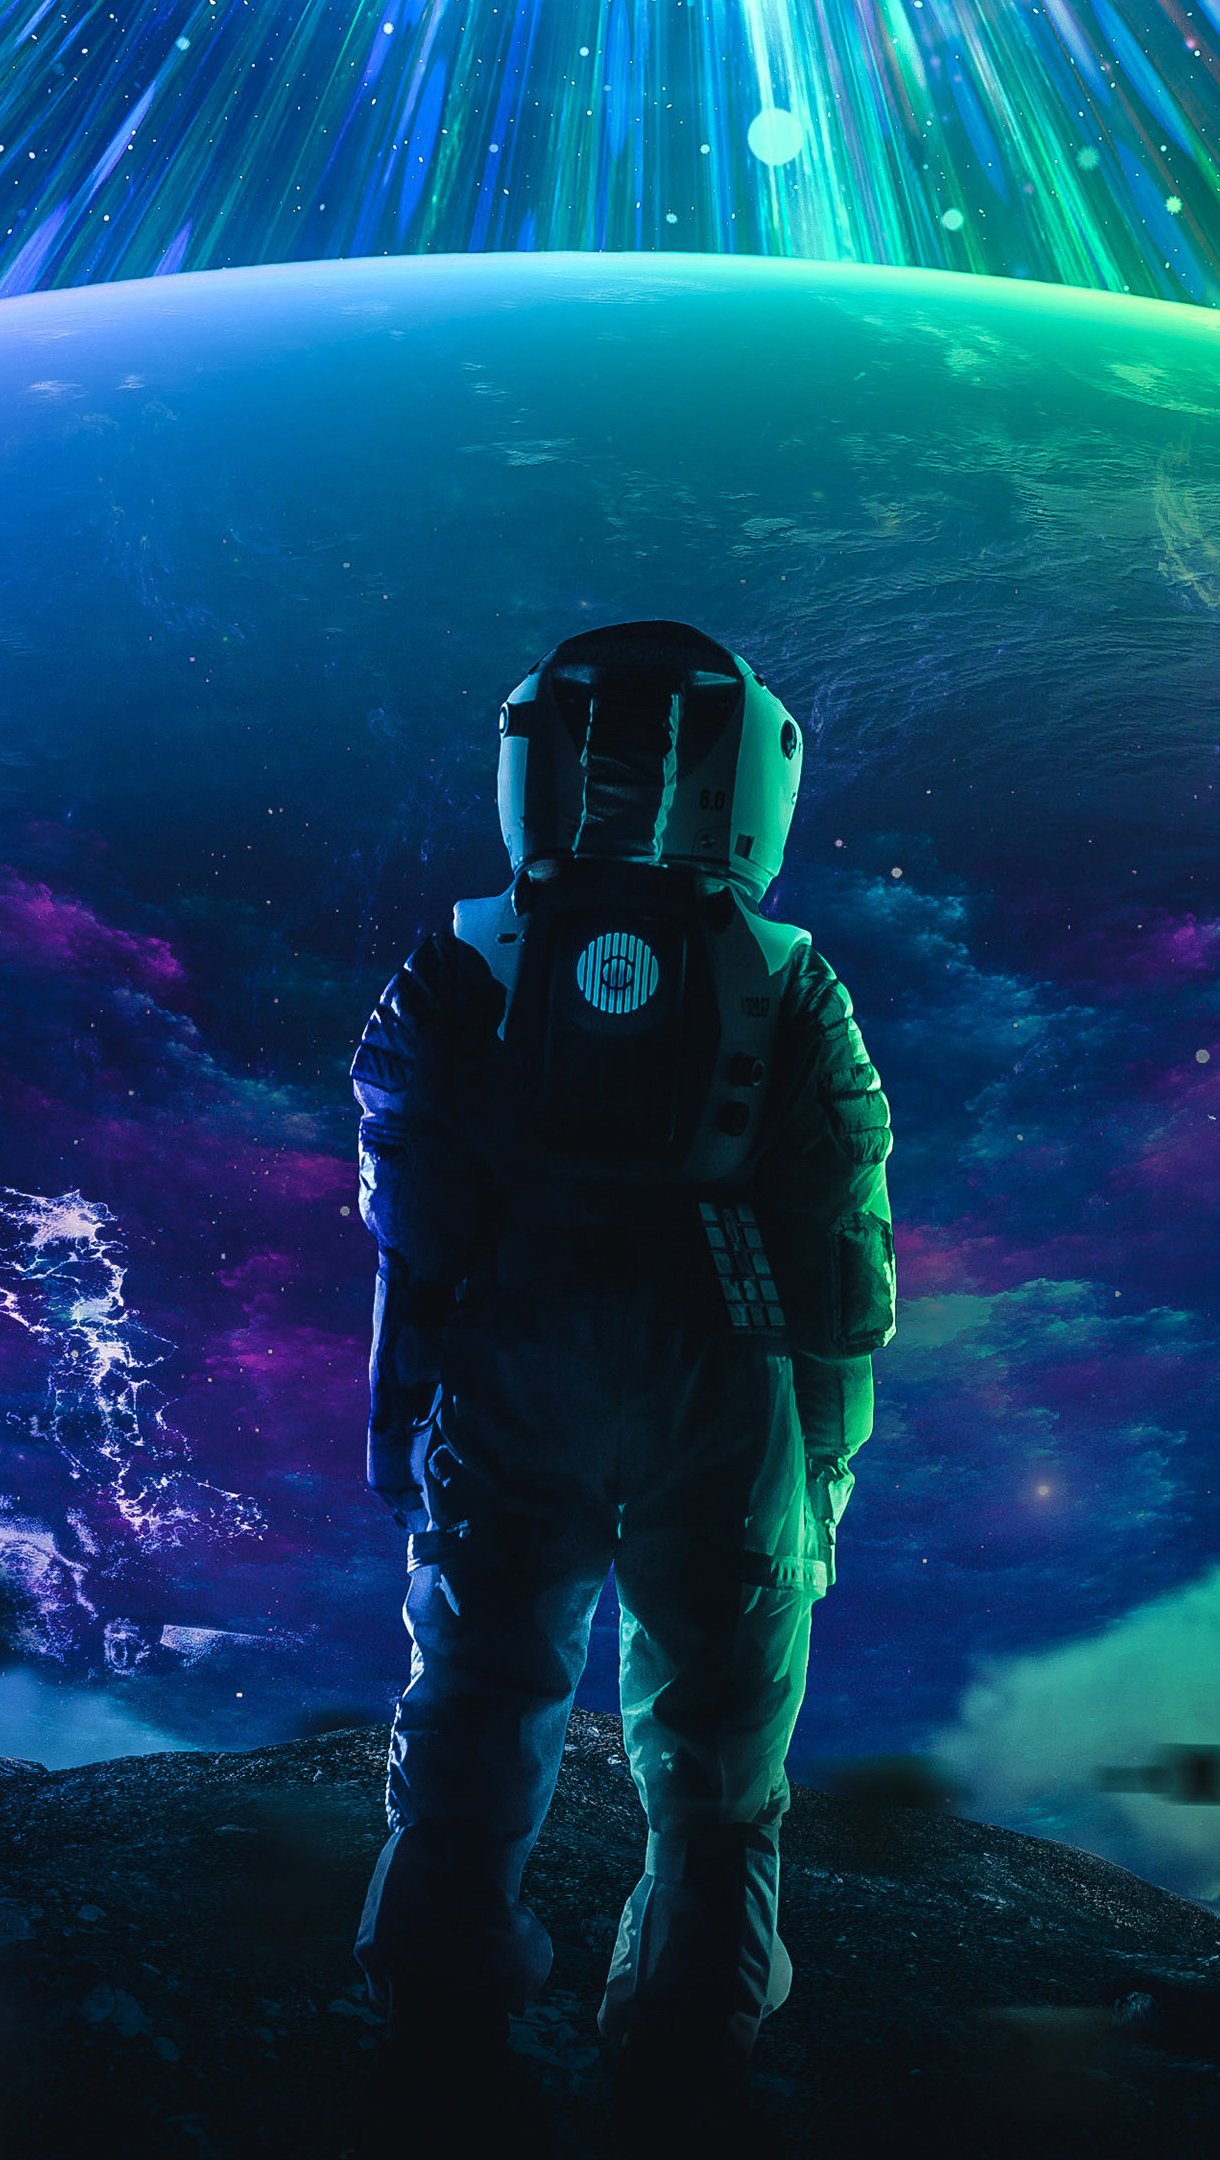 Astronaut looking at the sky Wallpaper 4k Ultra HD ID:9885